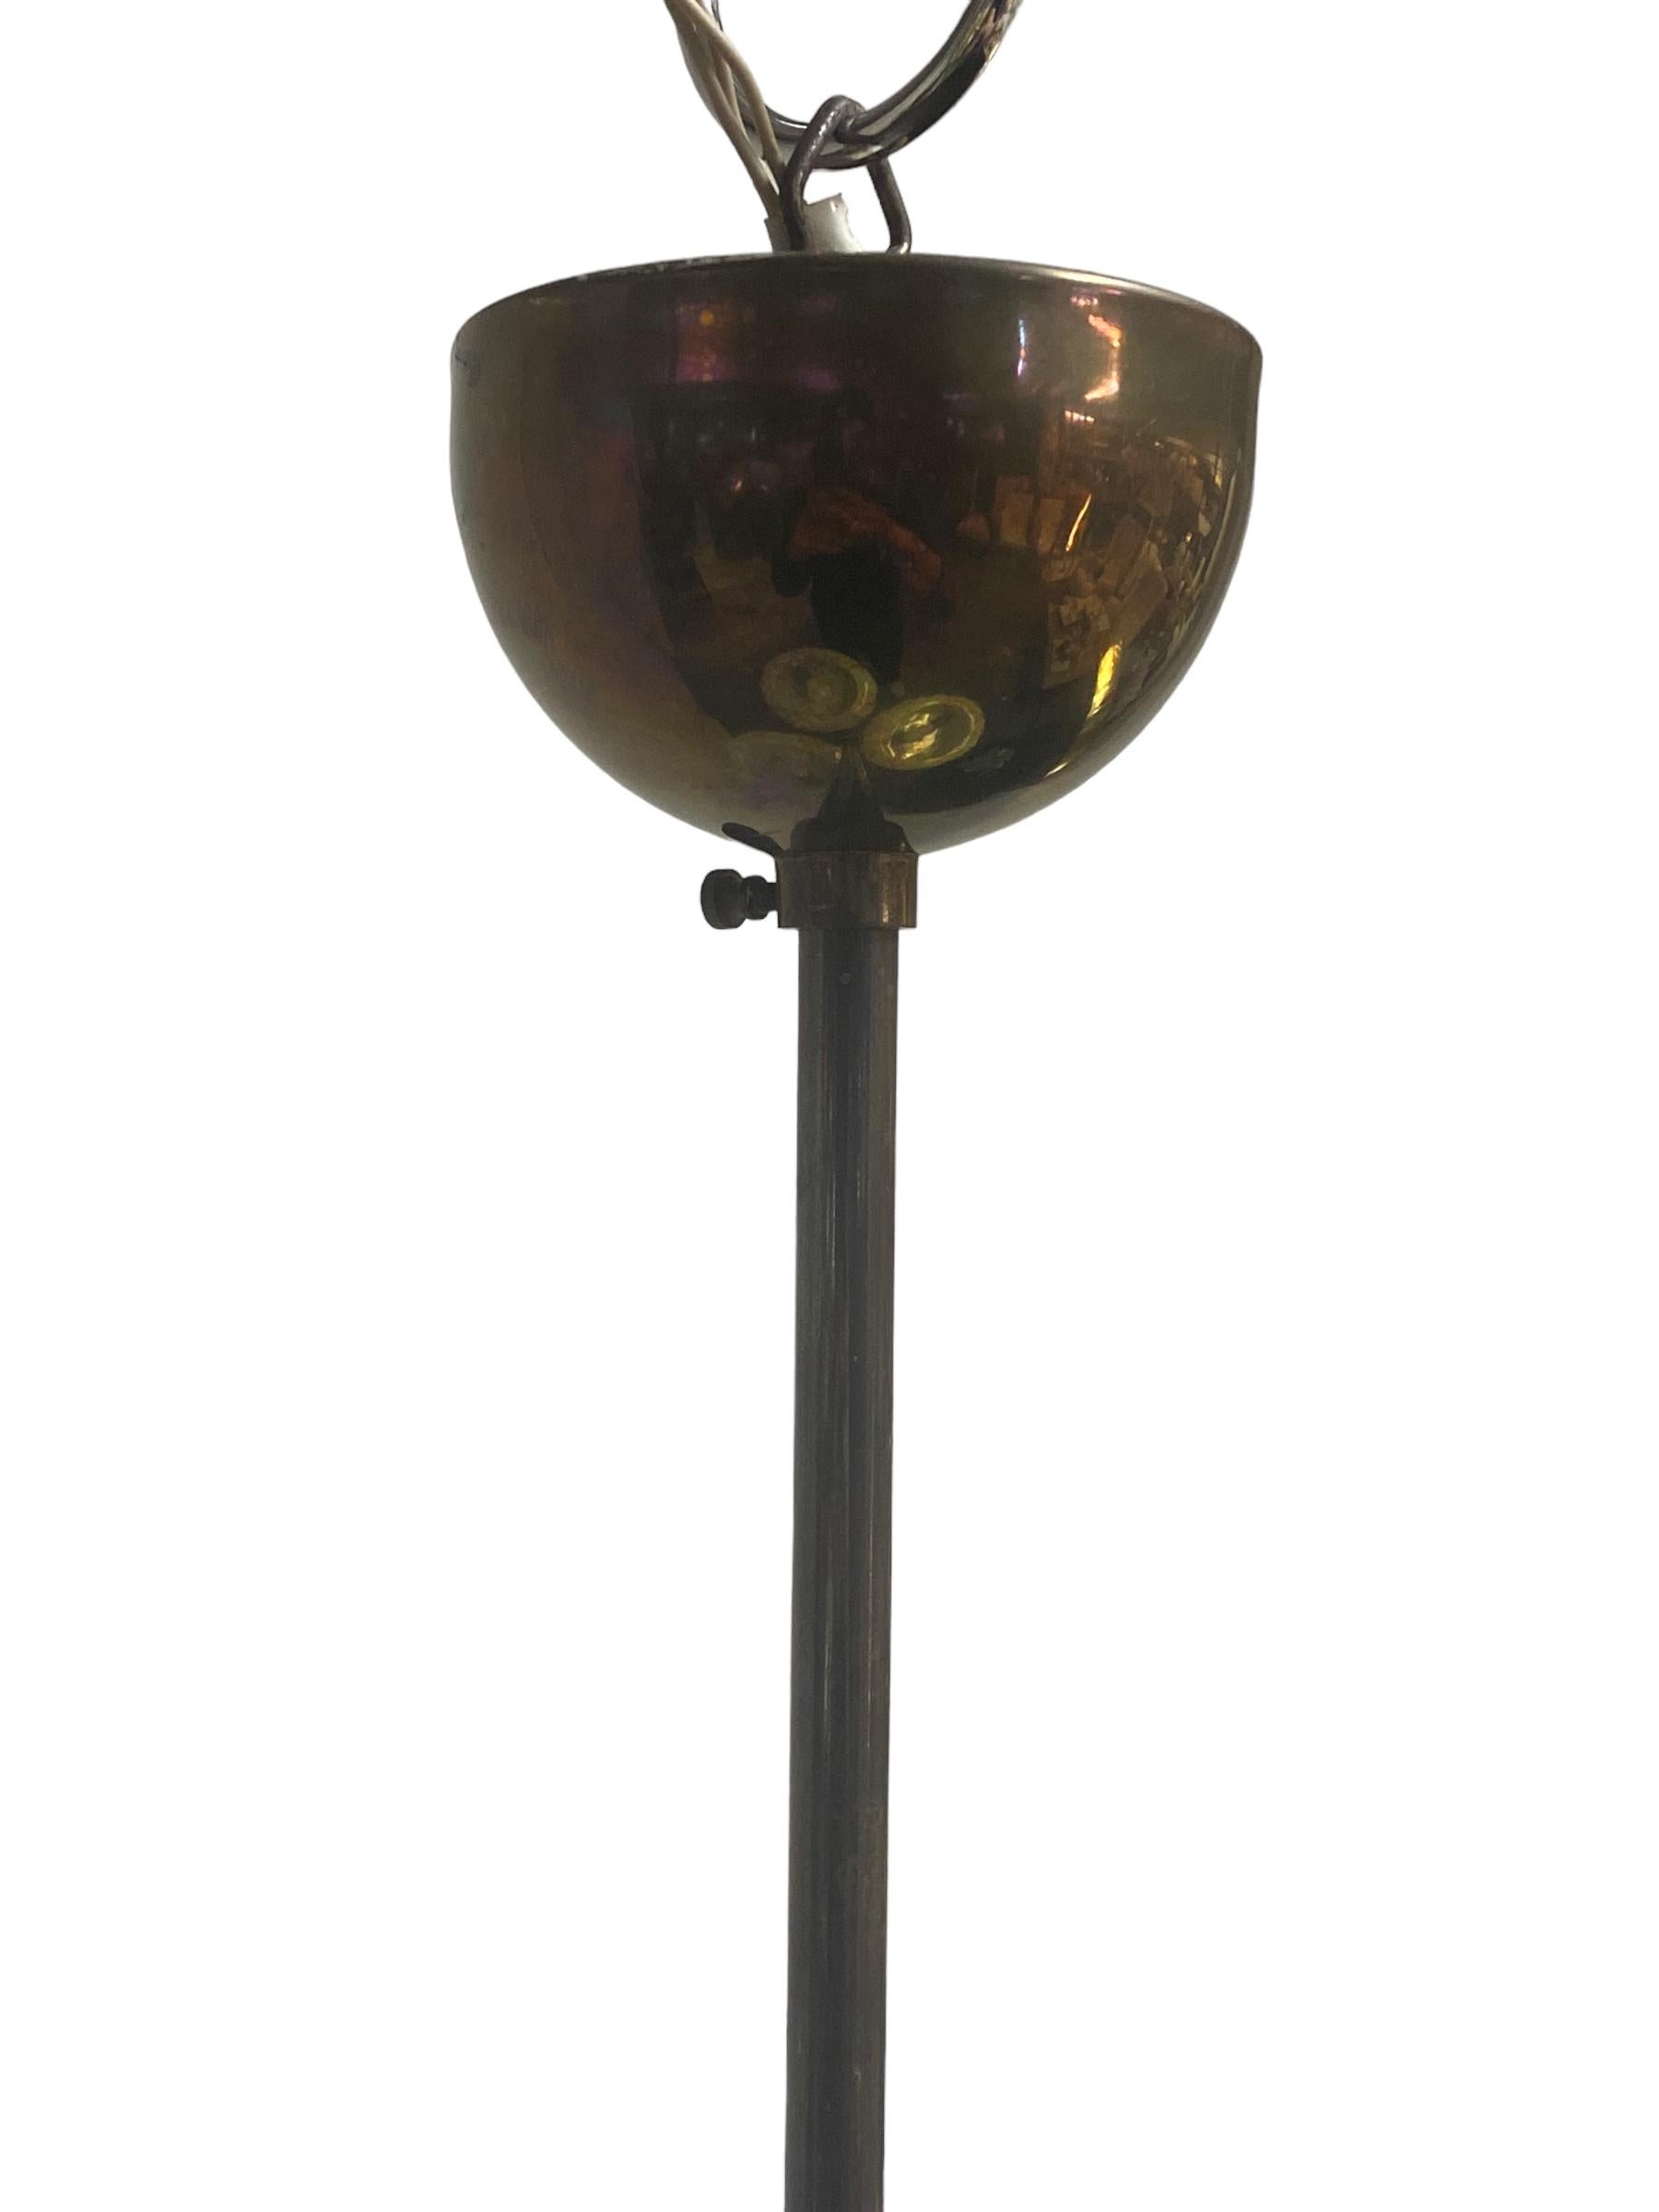 Scandinavian Modern An Early 1930s Paavo Tynell Ceiling Lamp in Full Original Condition For Sale